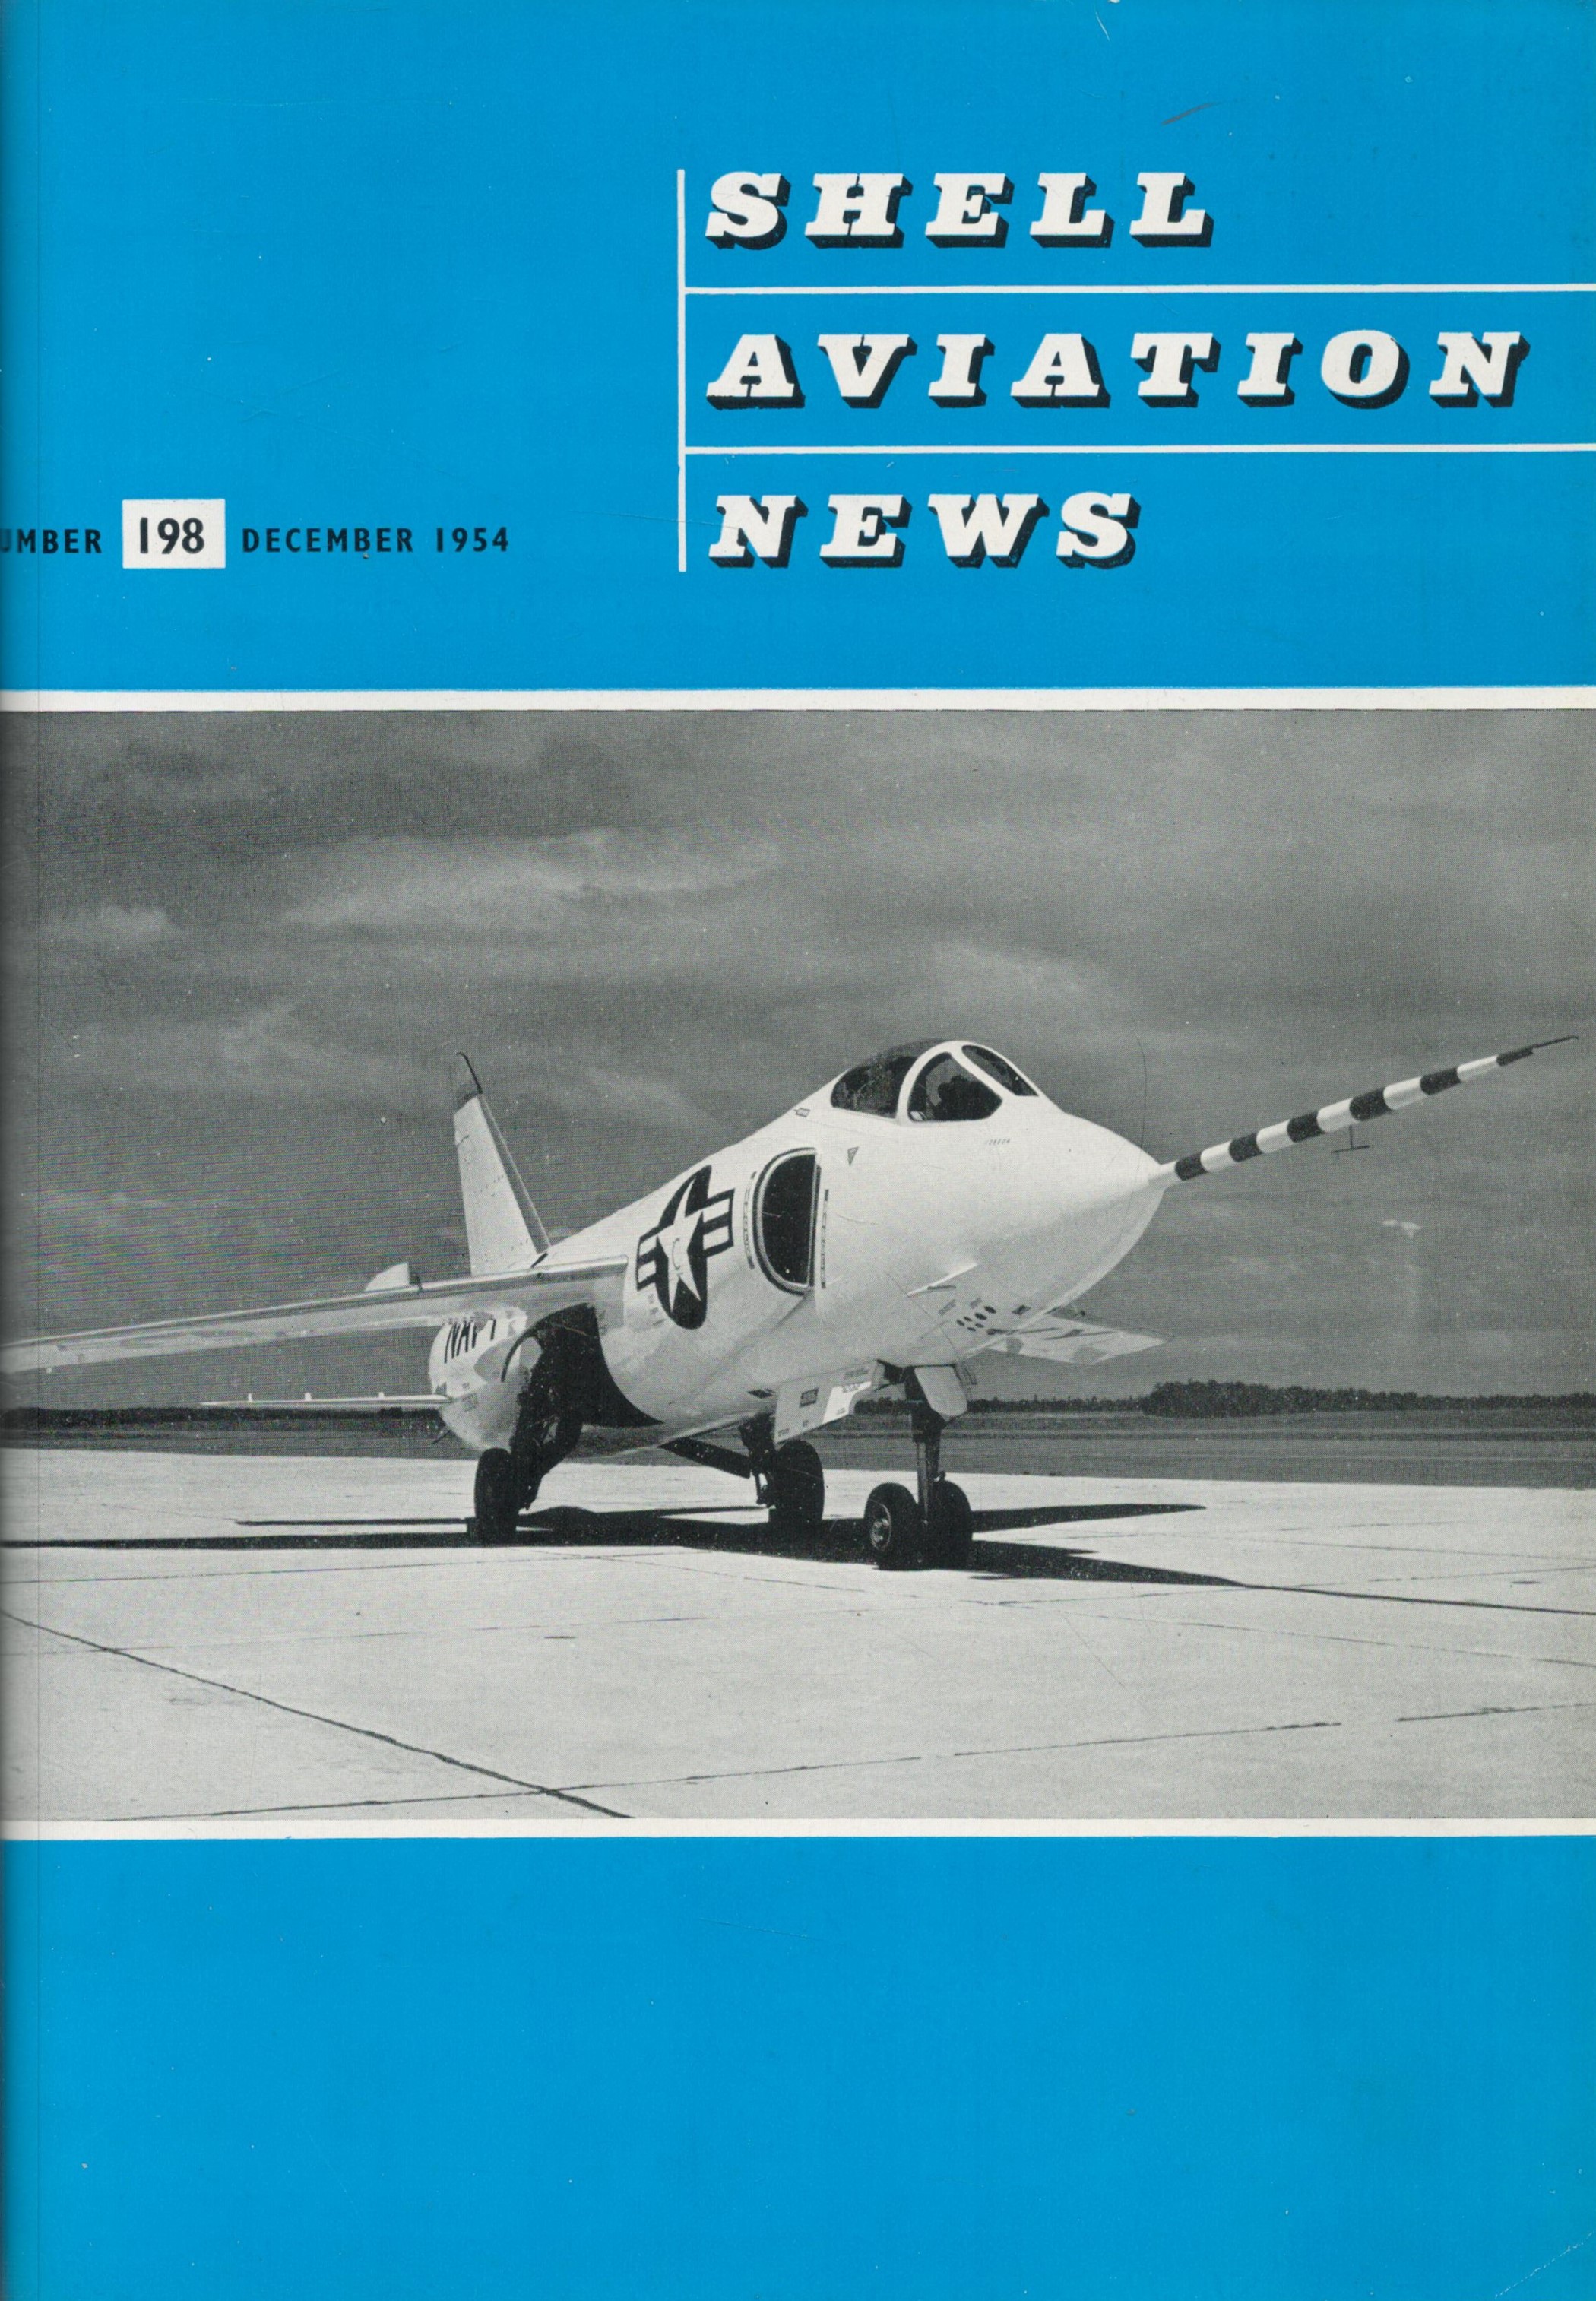 Shell Aviation News Jan to Dec 1954 and Jan to Dec 1955 unsigned Hardbacked Books Published by Shell - Image 3 of 4